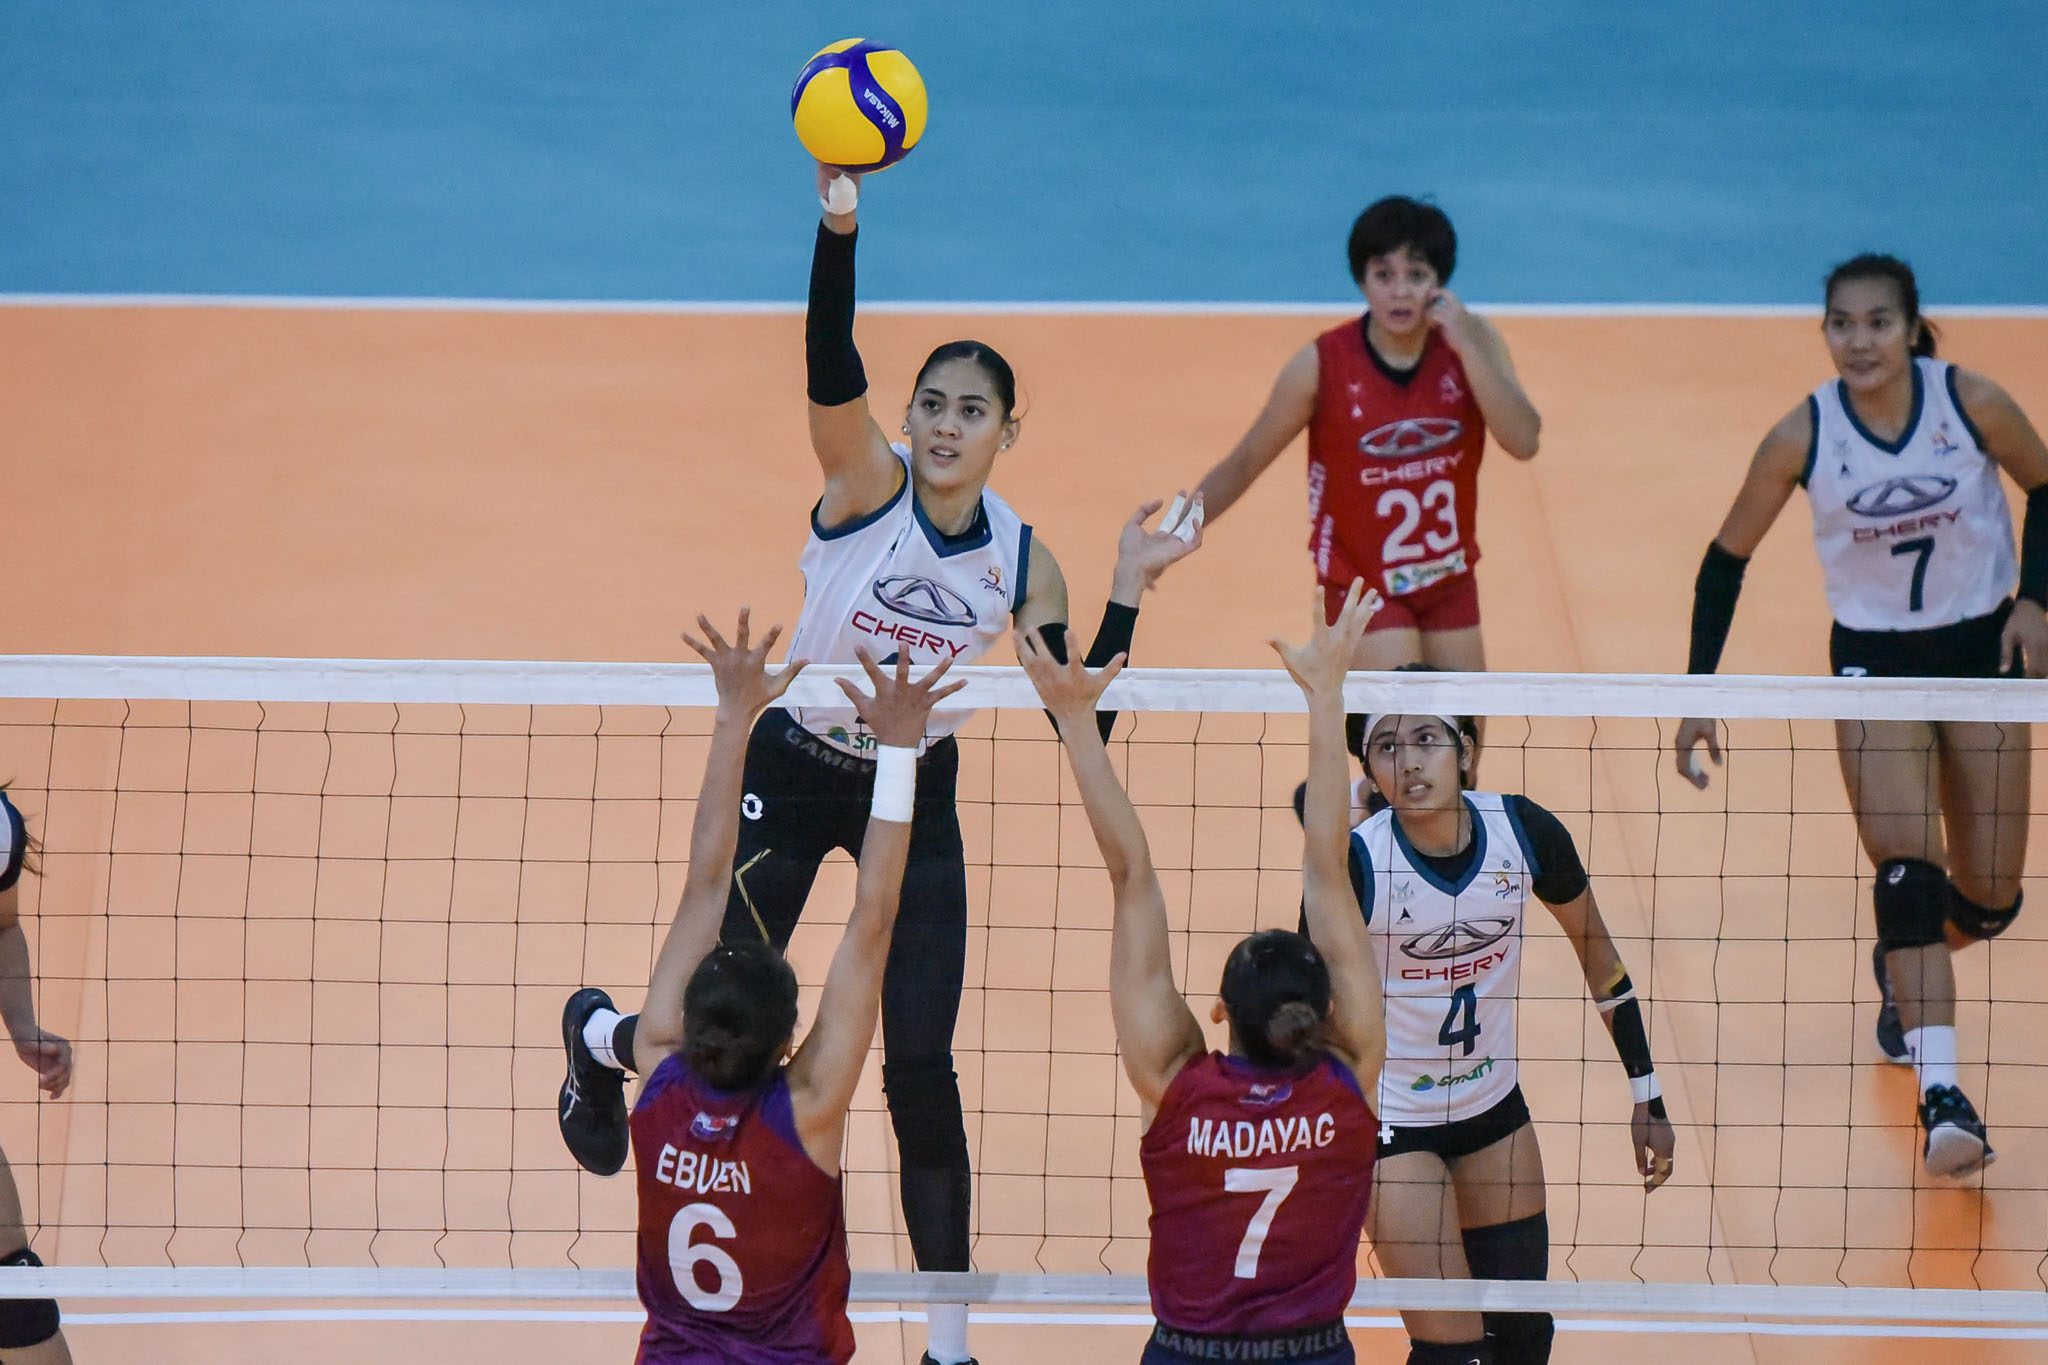 Chery Tiggo clinches PVL second seed in non-bearing Choco Mucho rout